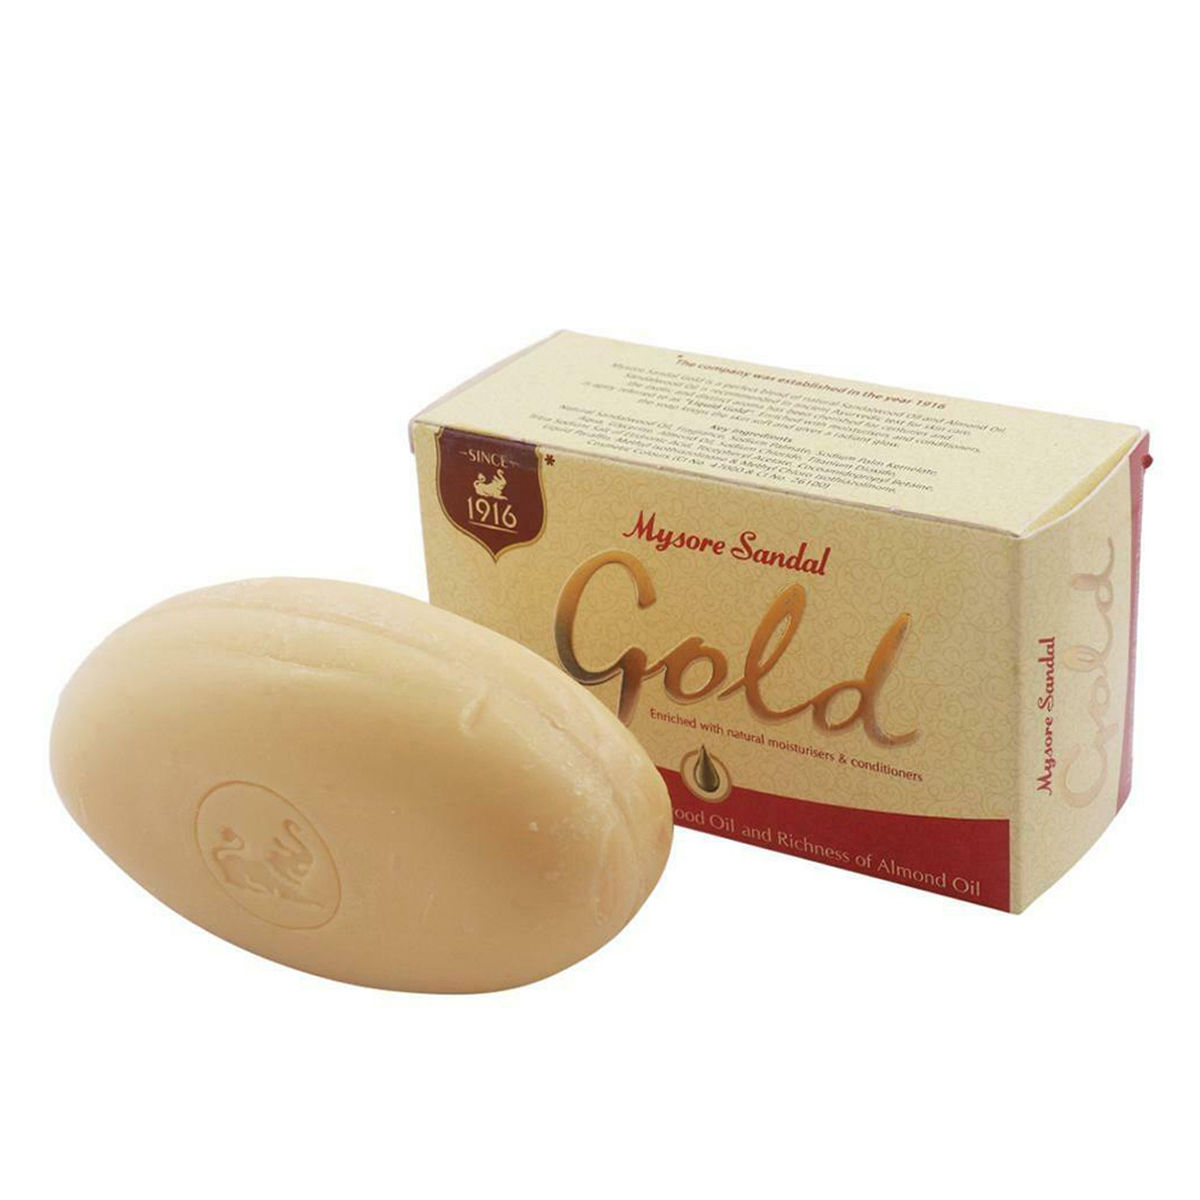 Buy Mysore Sandal Gold Soap 125g Online at Low Prices in India  Amazonin